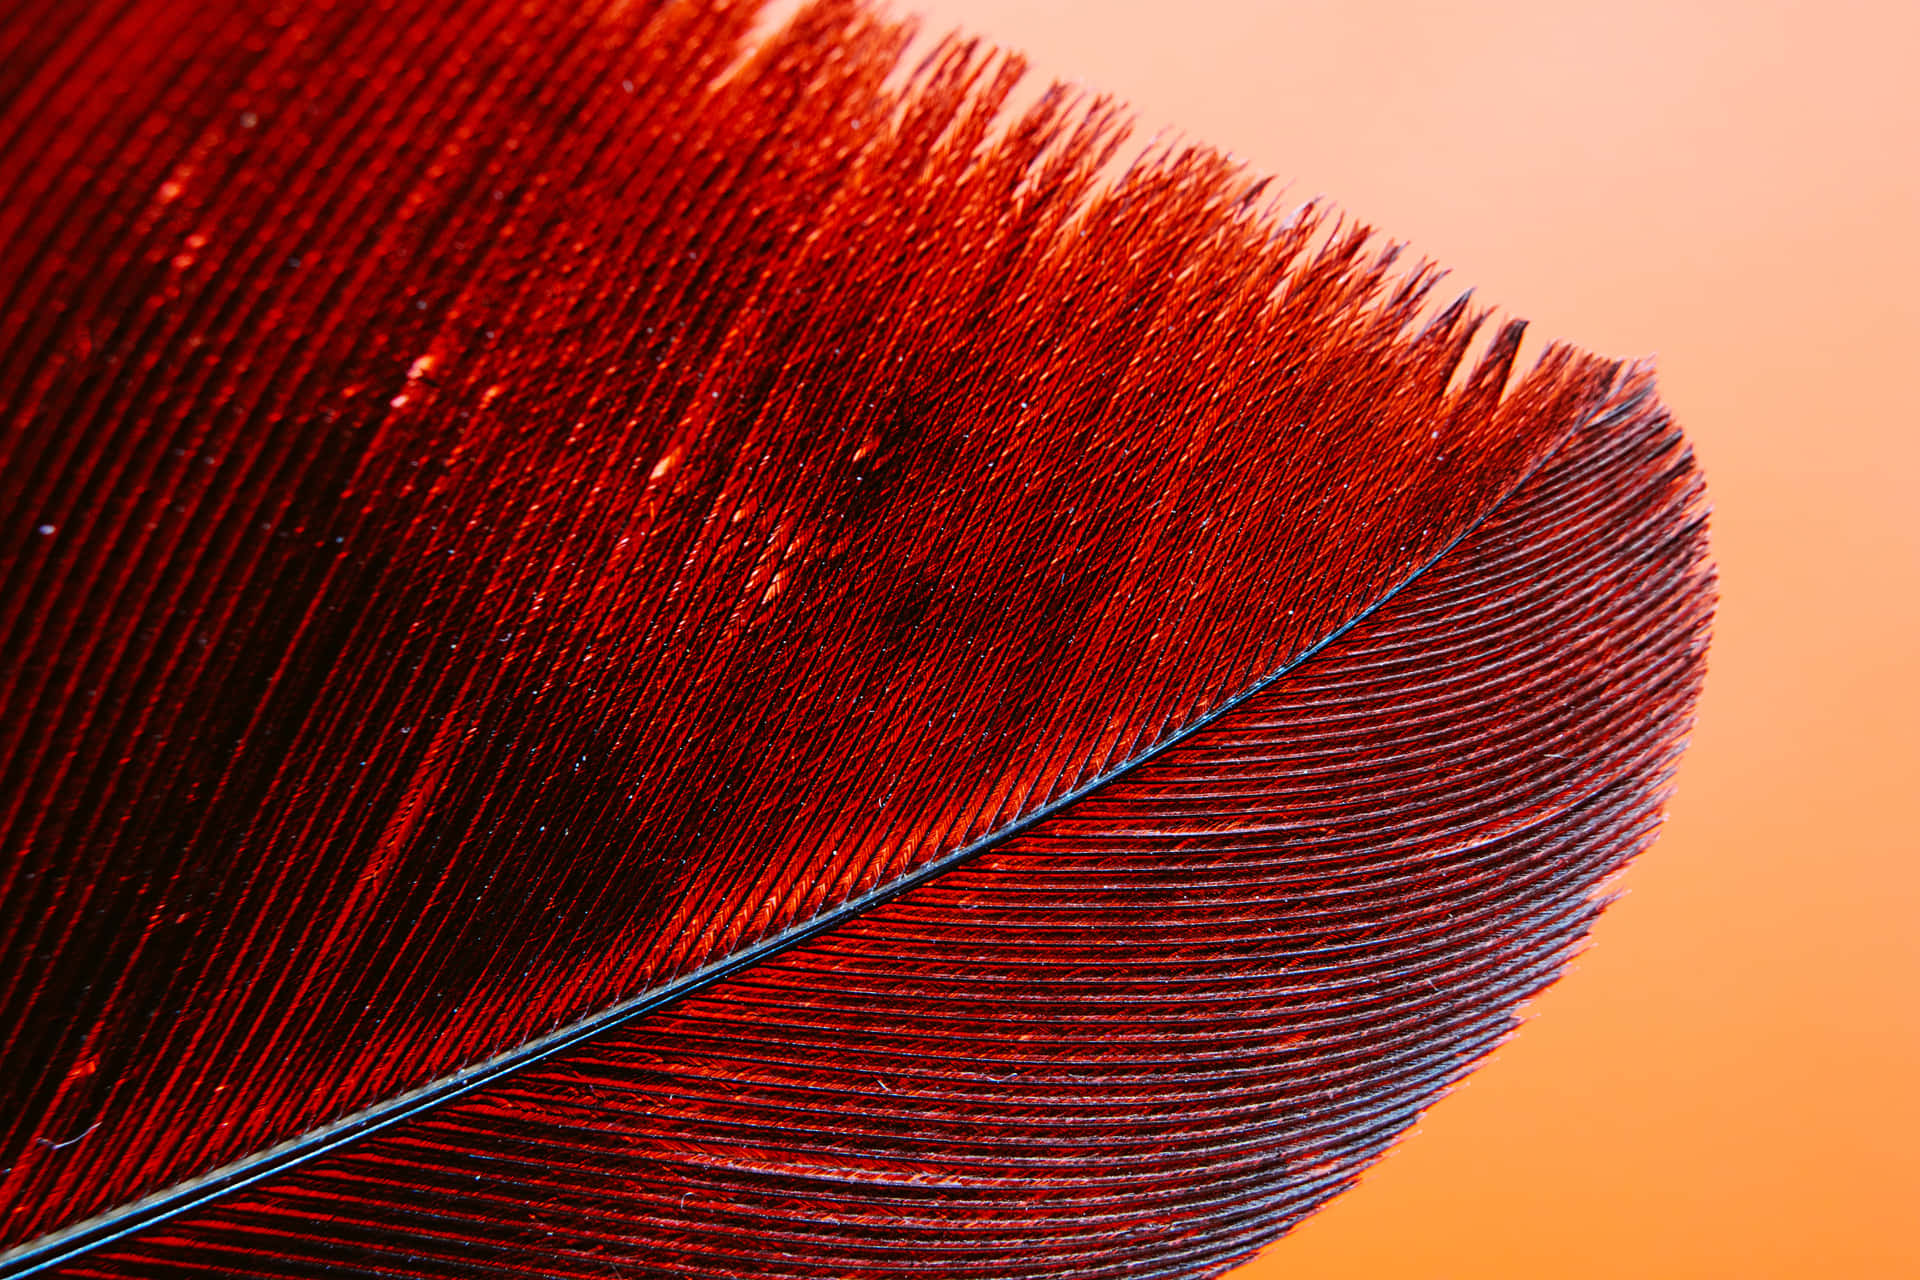 Intricate Red Feather [wallpaper] Wallpaper